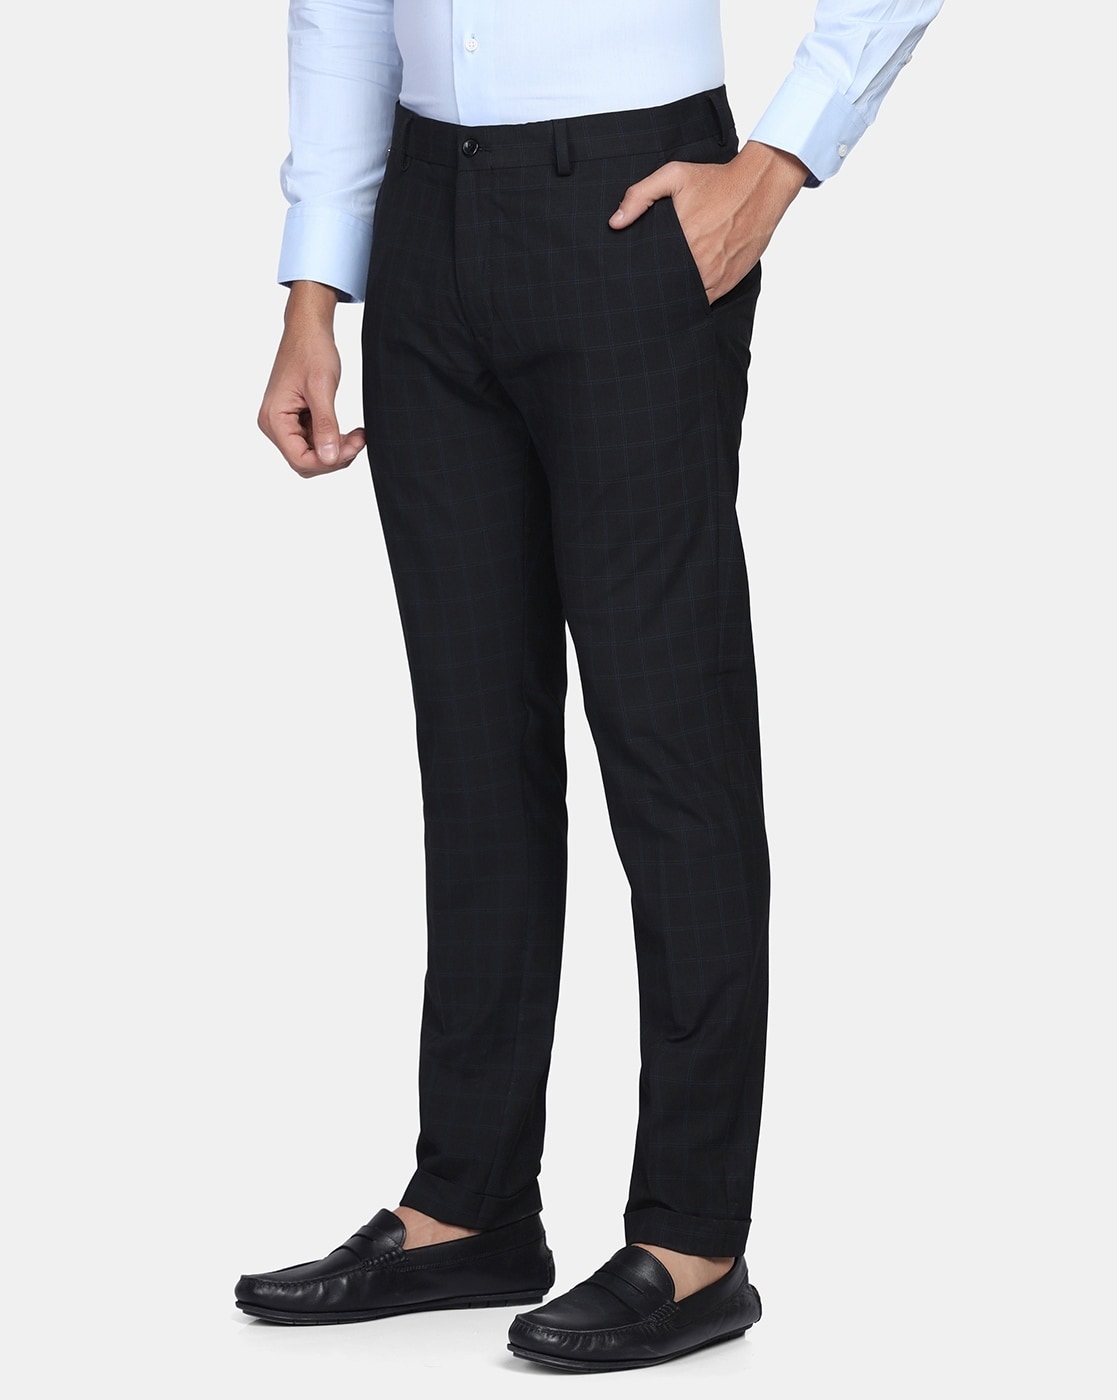 Buy BLACKBERRYS Natural Printed Polyester Cotton Slim Fit Men's Casual  Trousers | Shoppers Stop